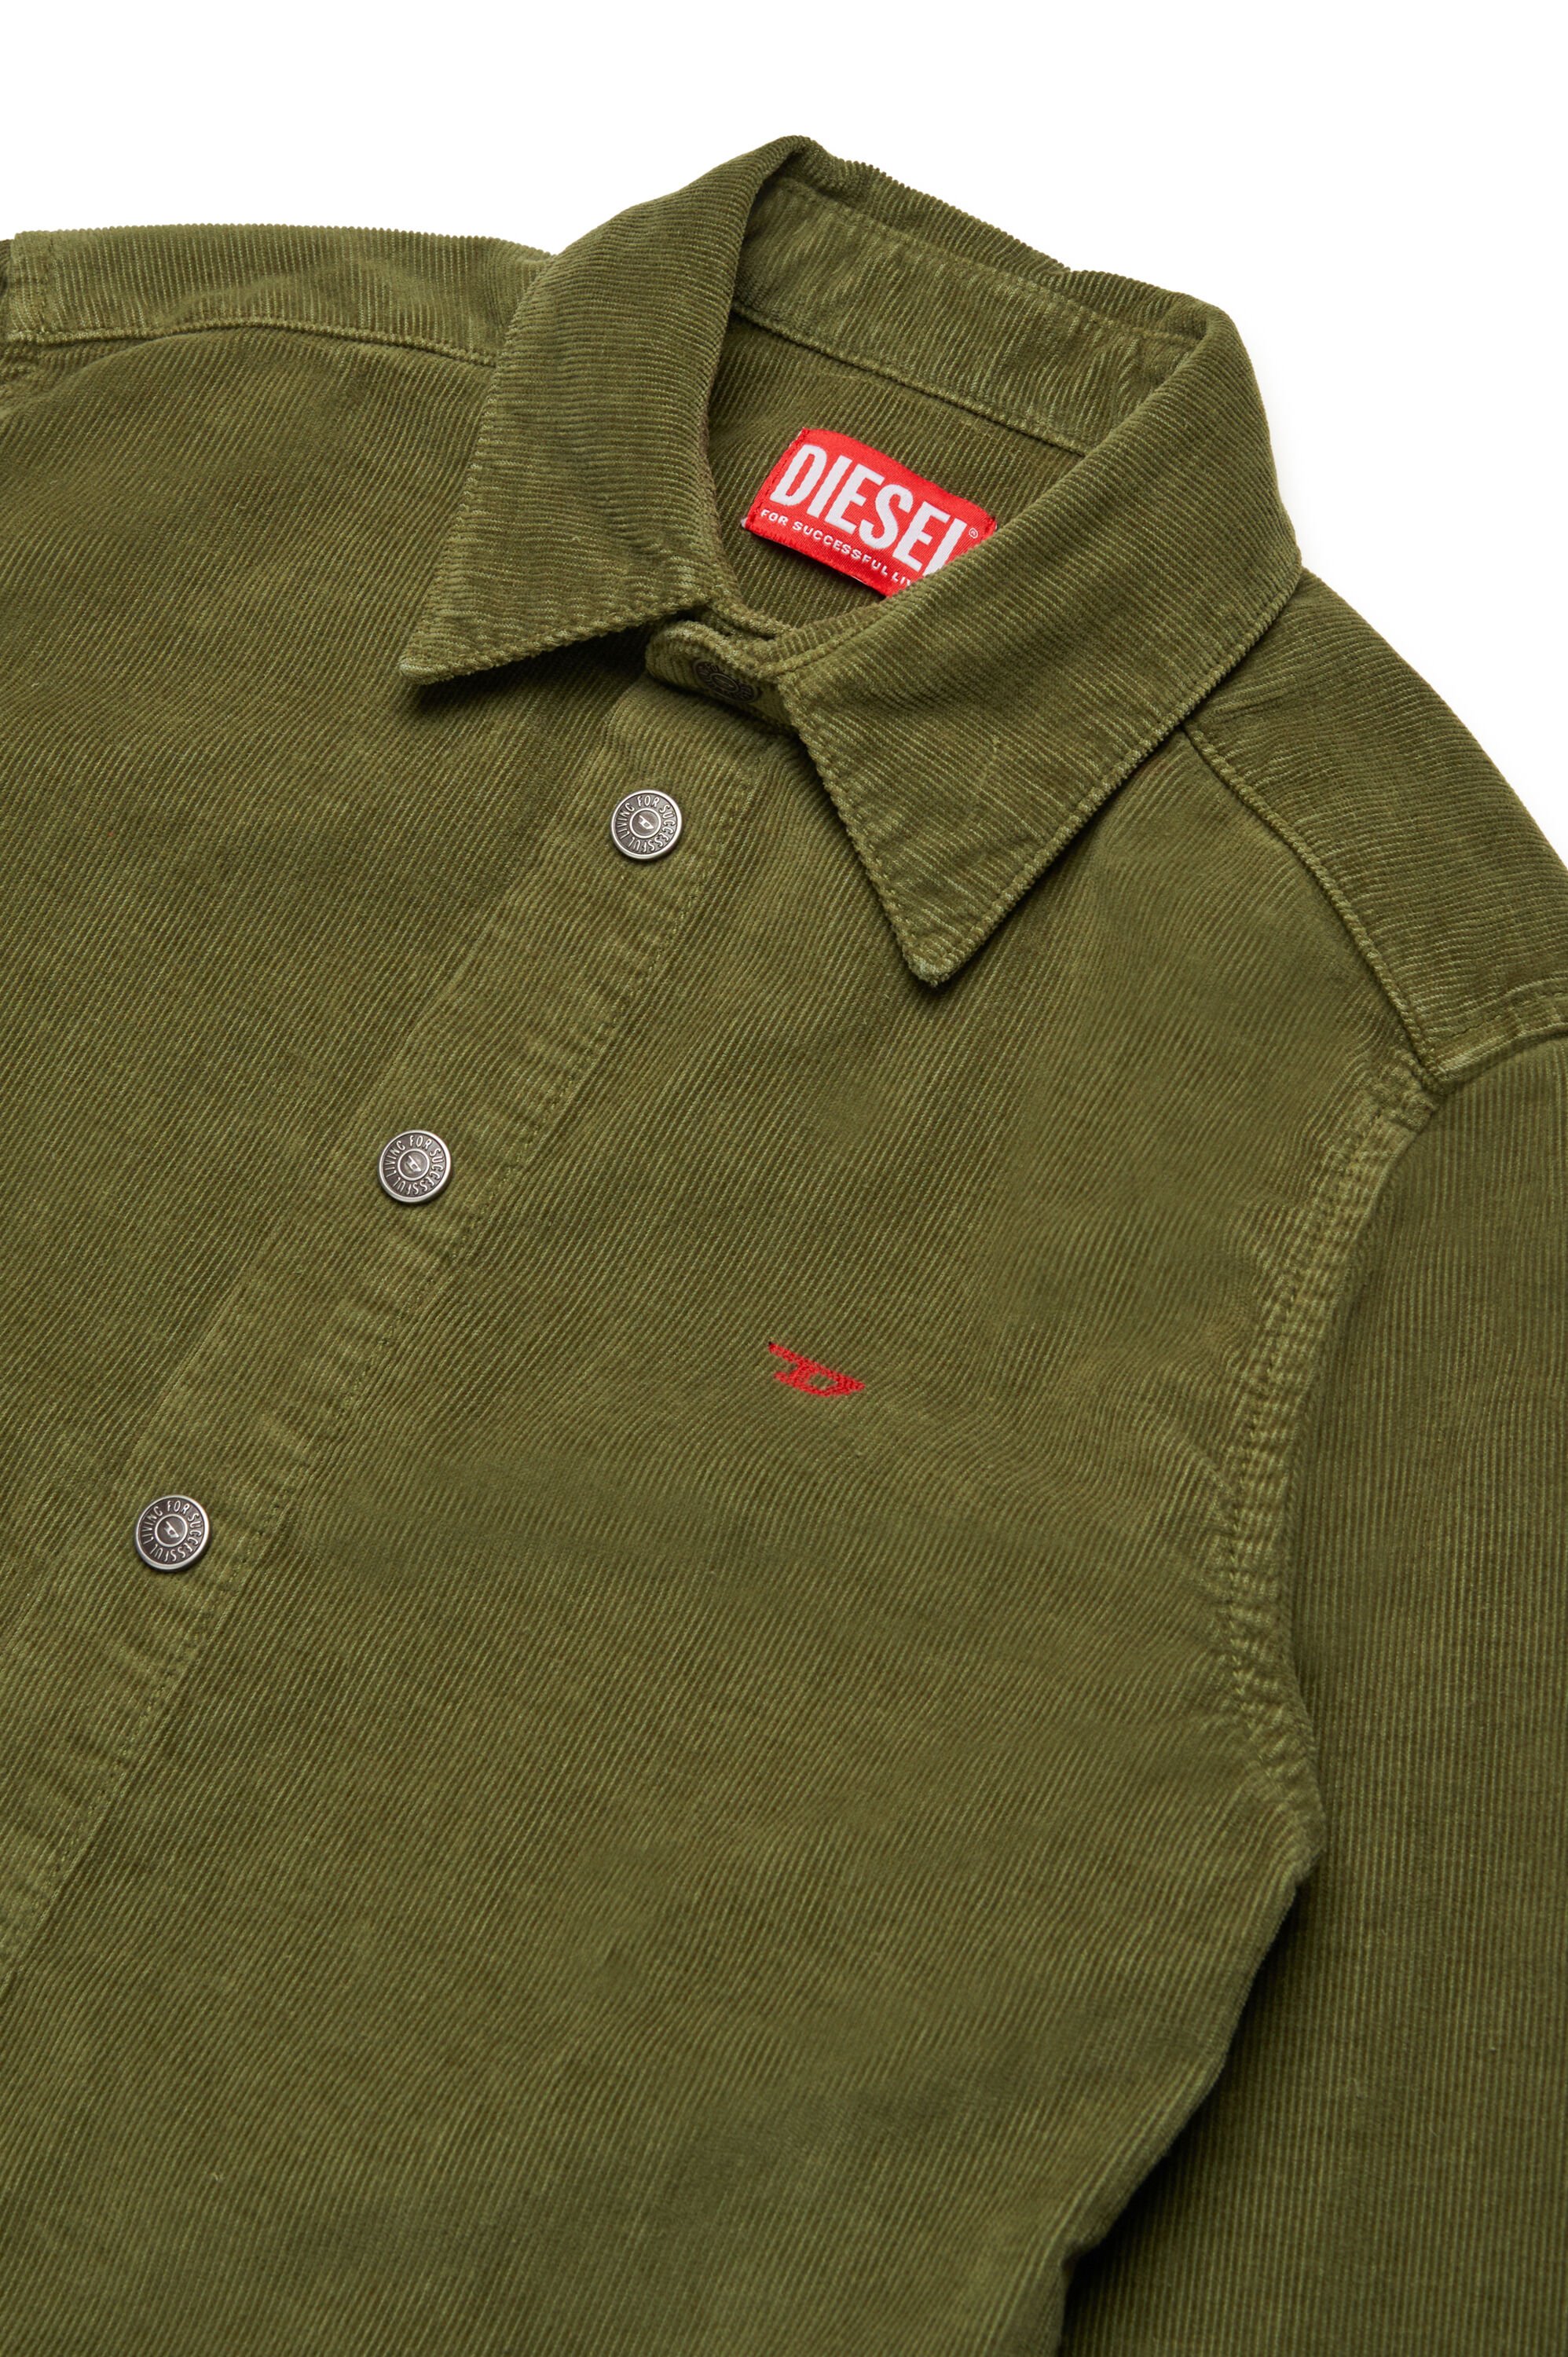 Diesel - CSIMPLY-OVER, Man Corduroy shirt with small D logo in Green - Image 3